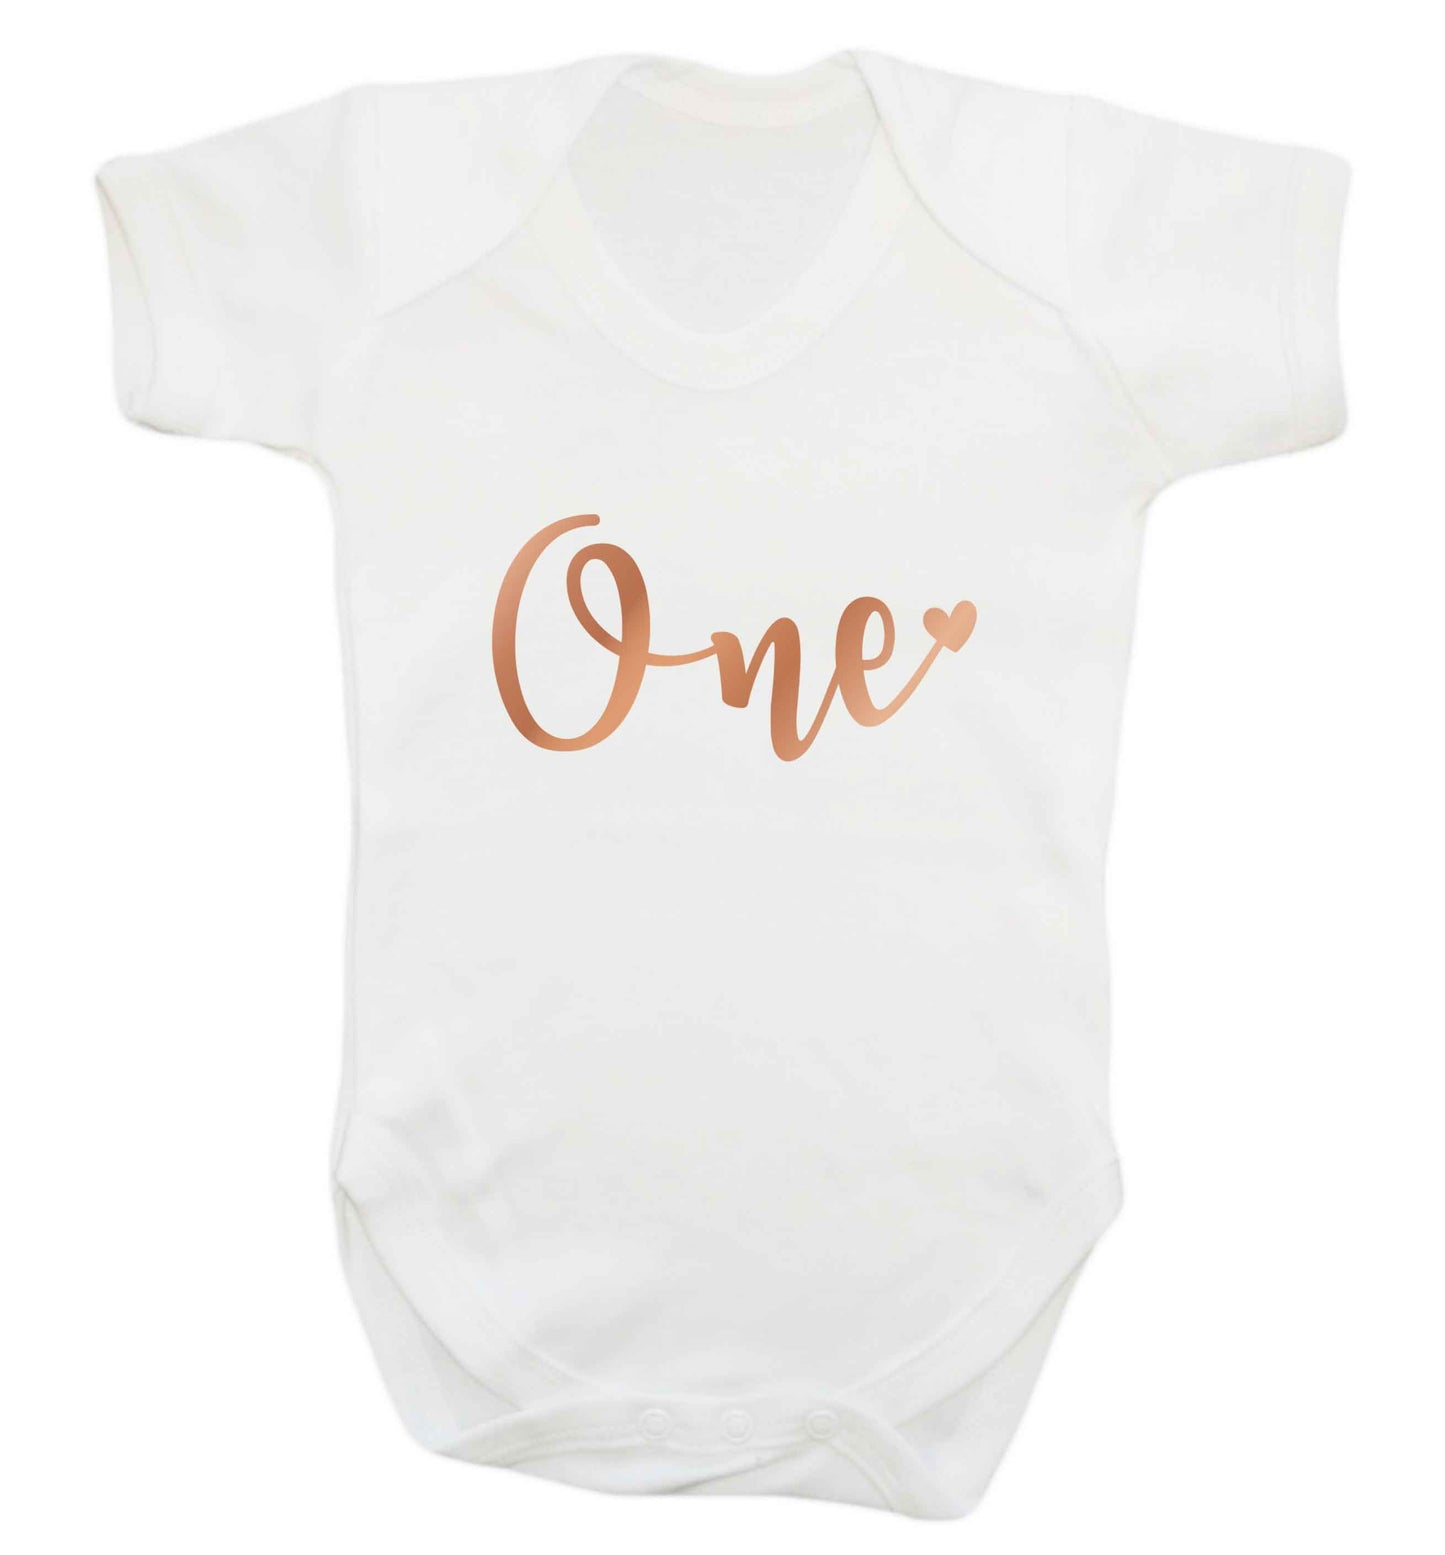 Rose Gold One baby vest white 18-24 months